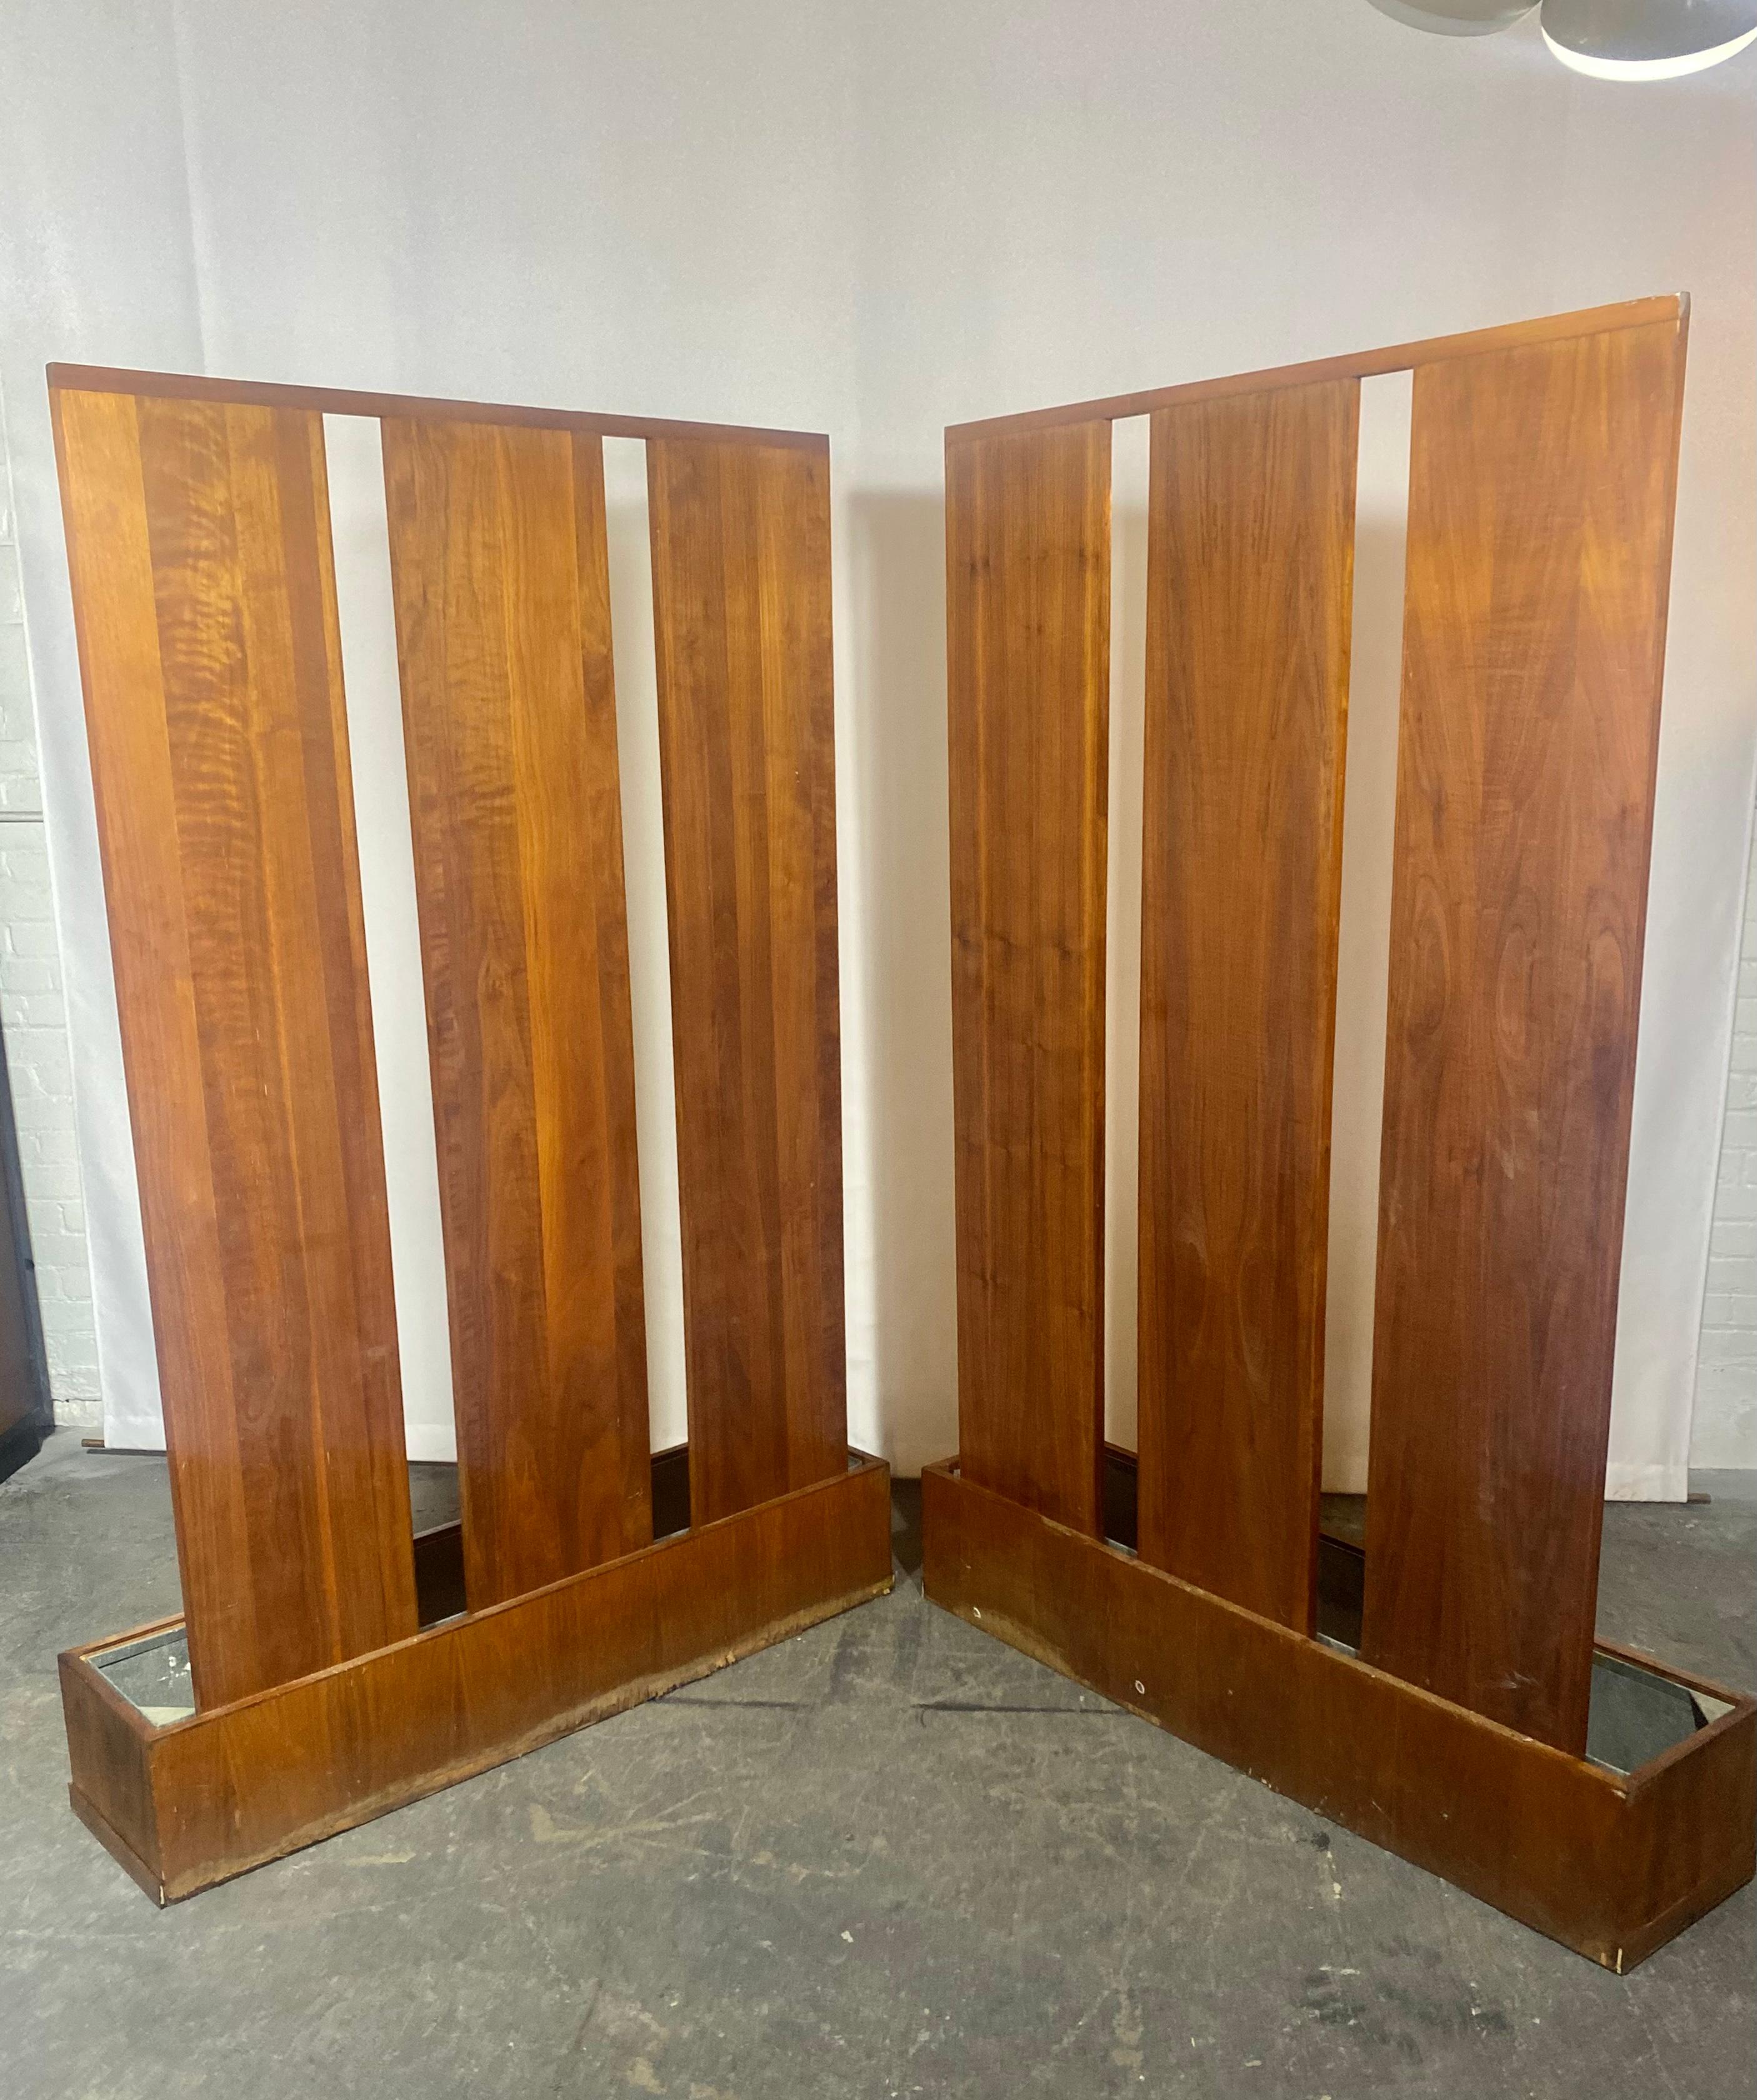 Classic Mid Century Modern Architectural Room Divider's with planter boxes For Sale 3